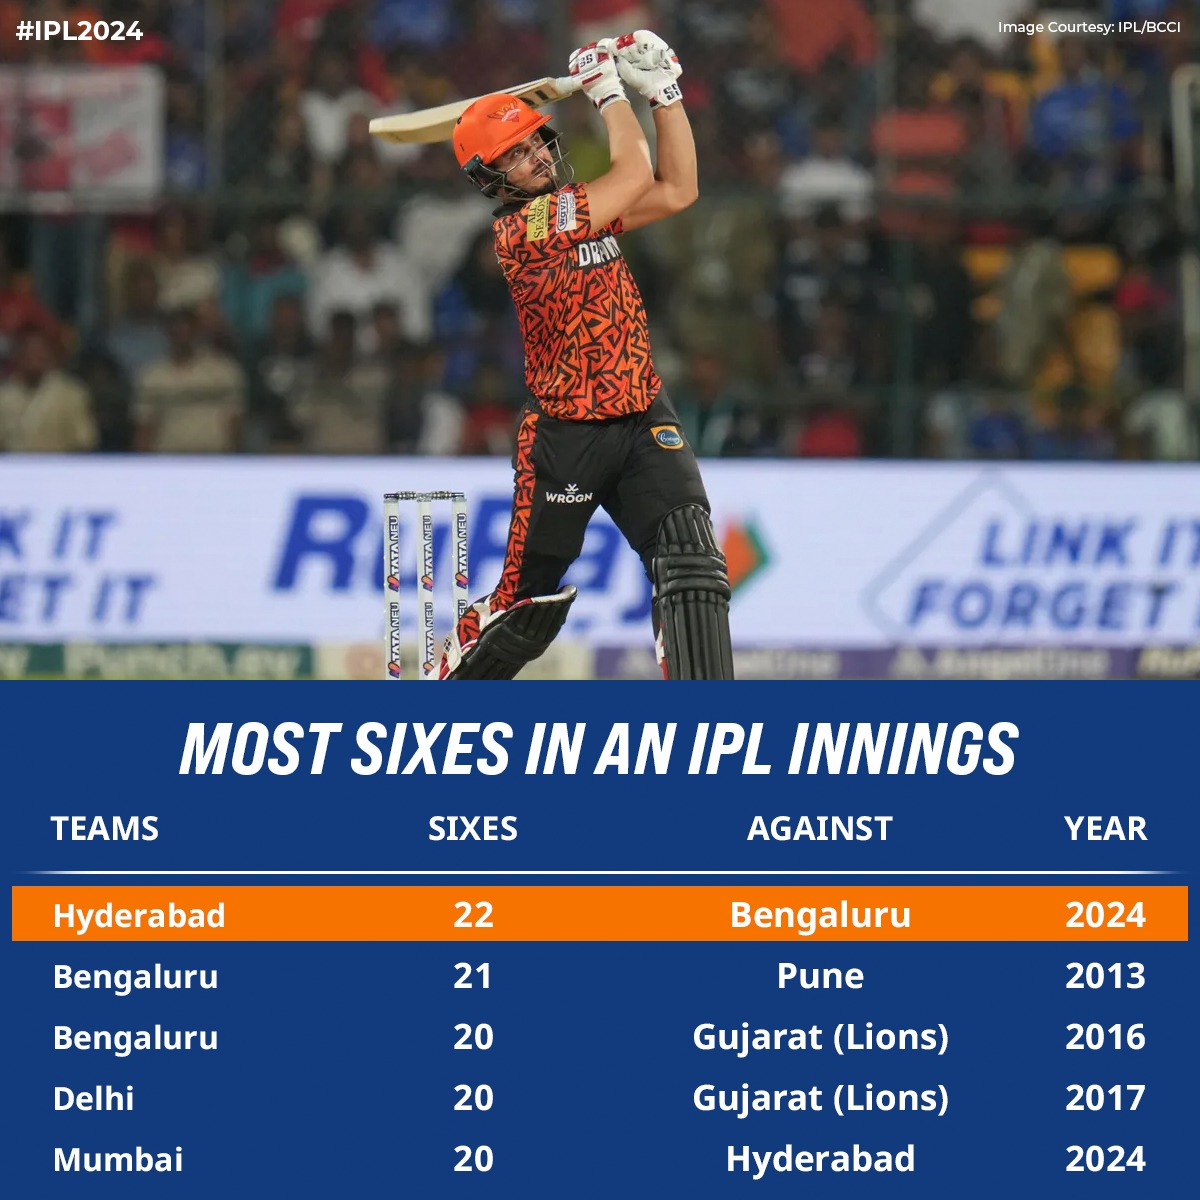 Smashing sixes and shattering records! 🔥 SRH set a new record for the most sixes hit in an IPL innings, surpassing RCB's previous tally of 21. #RCBvSRH #IPL #IPL2024